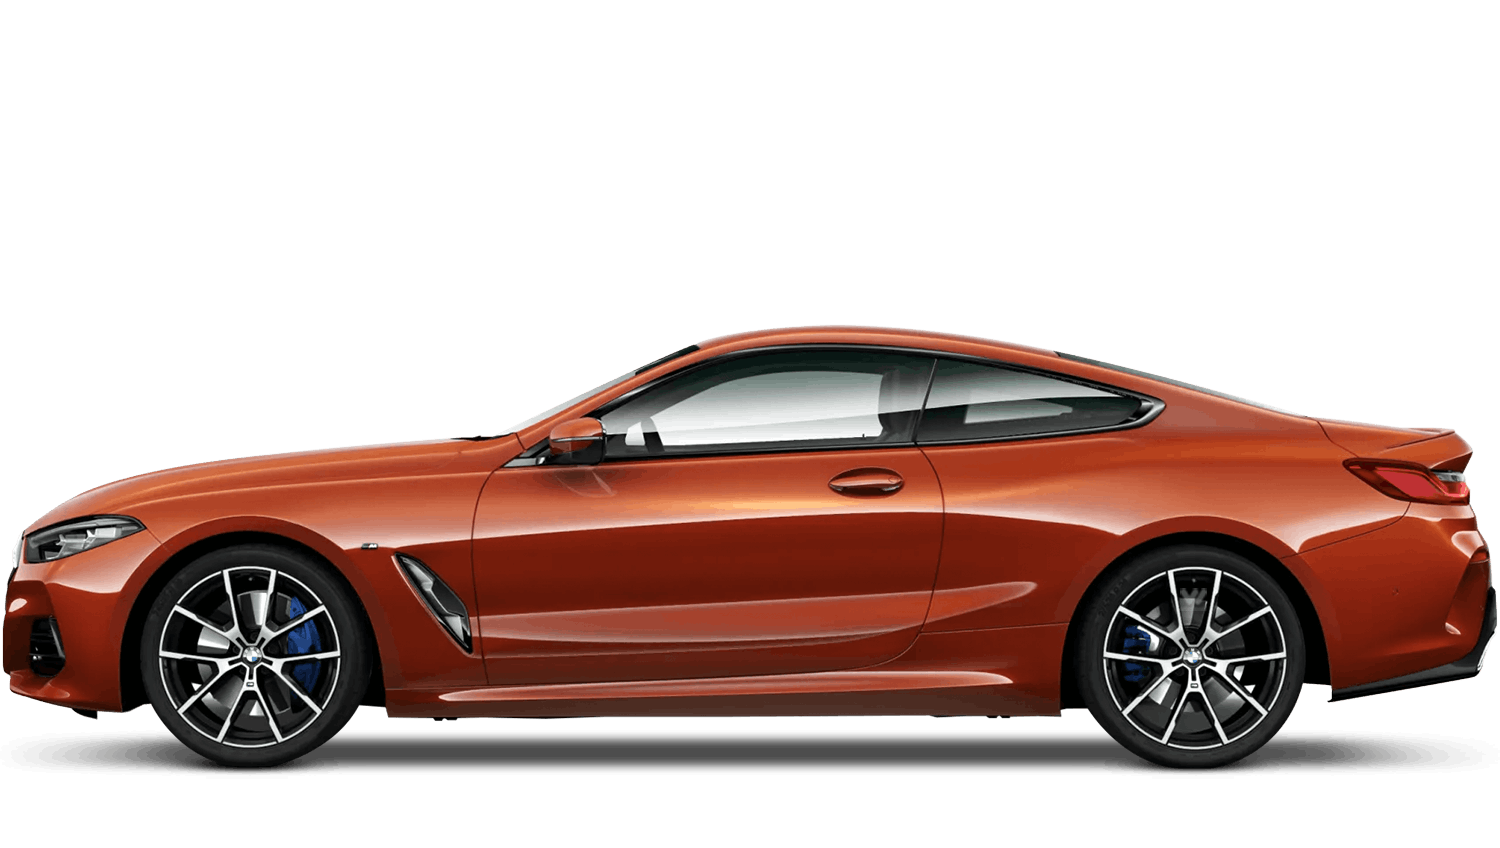 Bmw 8 Series New Car Offers